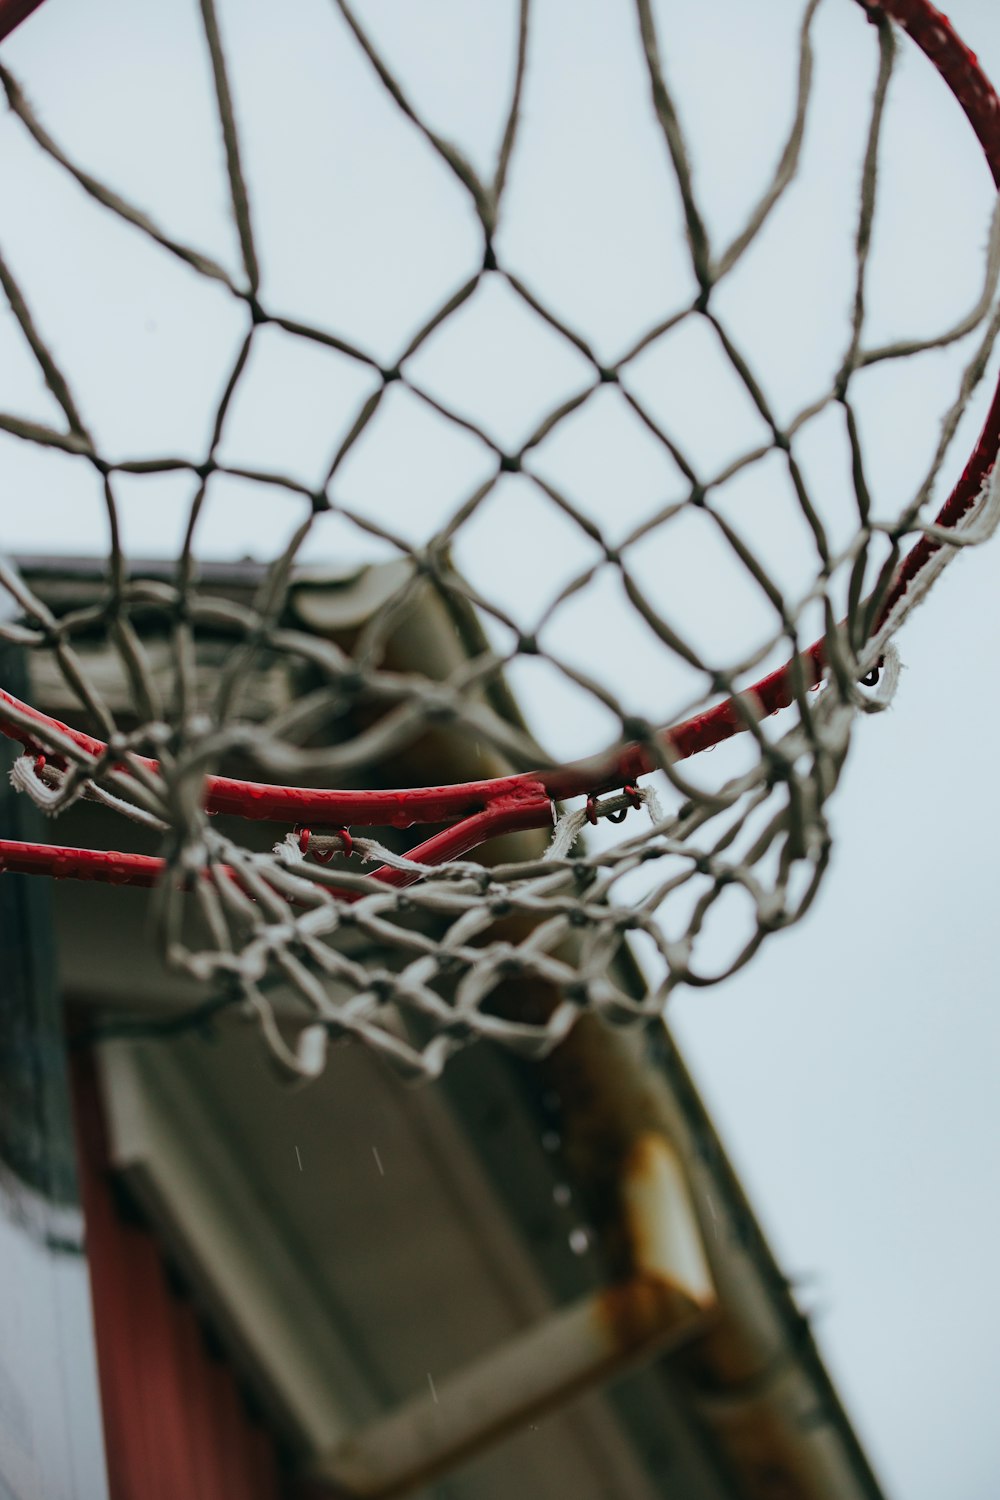 a close up of a basketball net with a building in the background